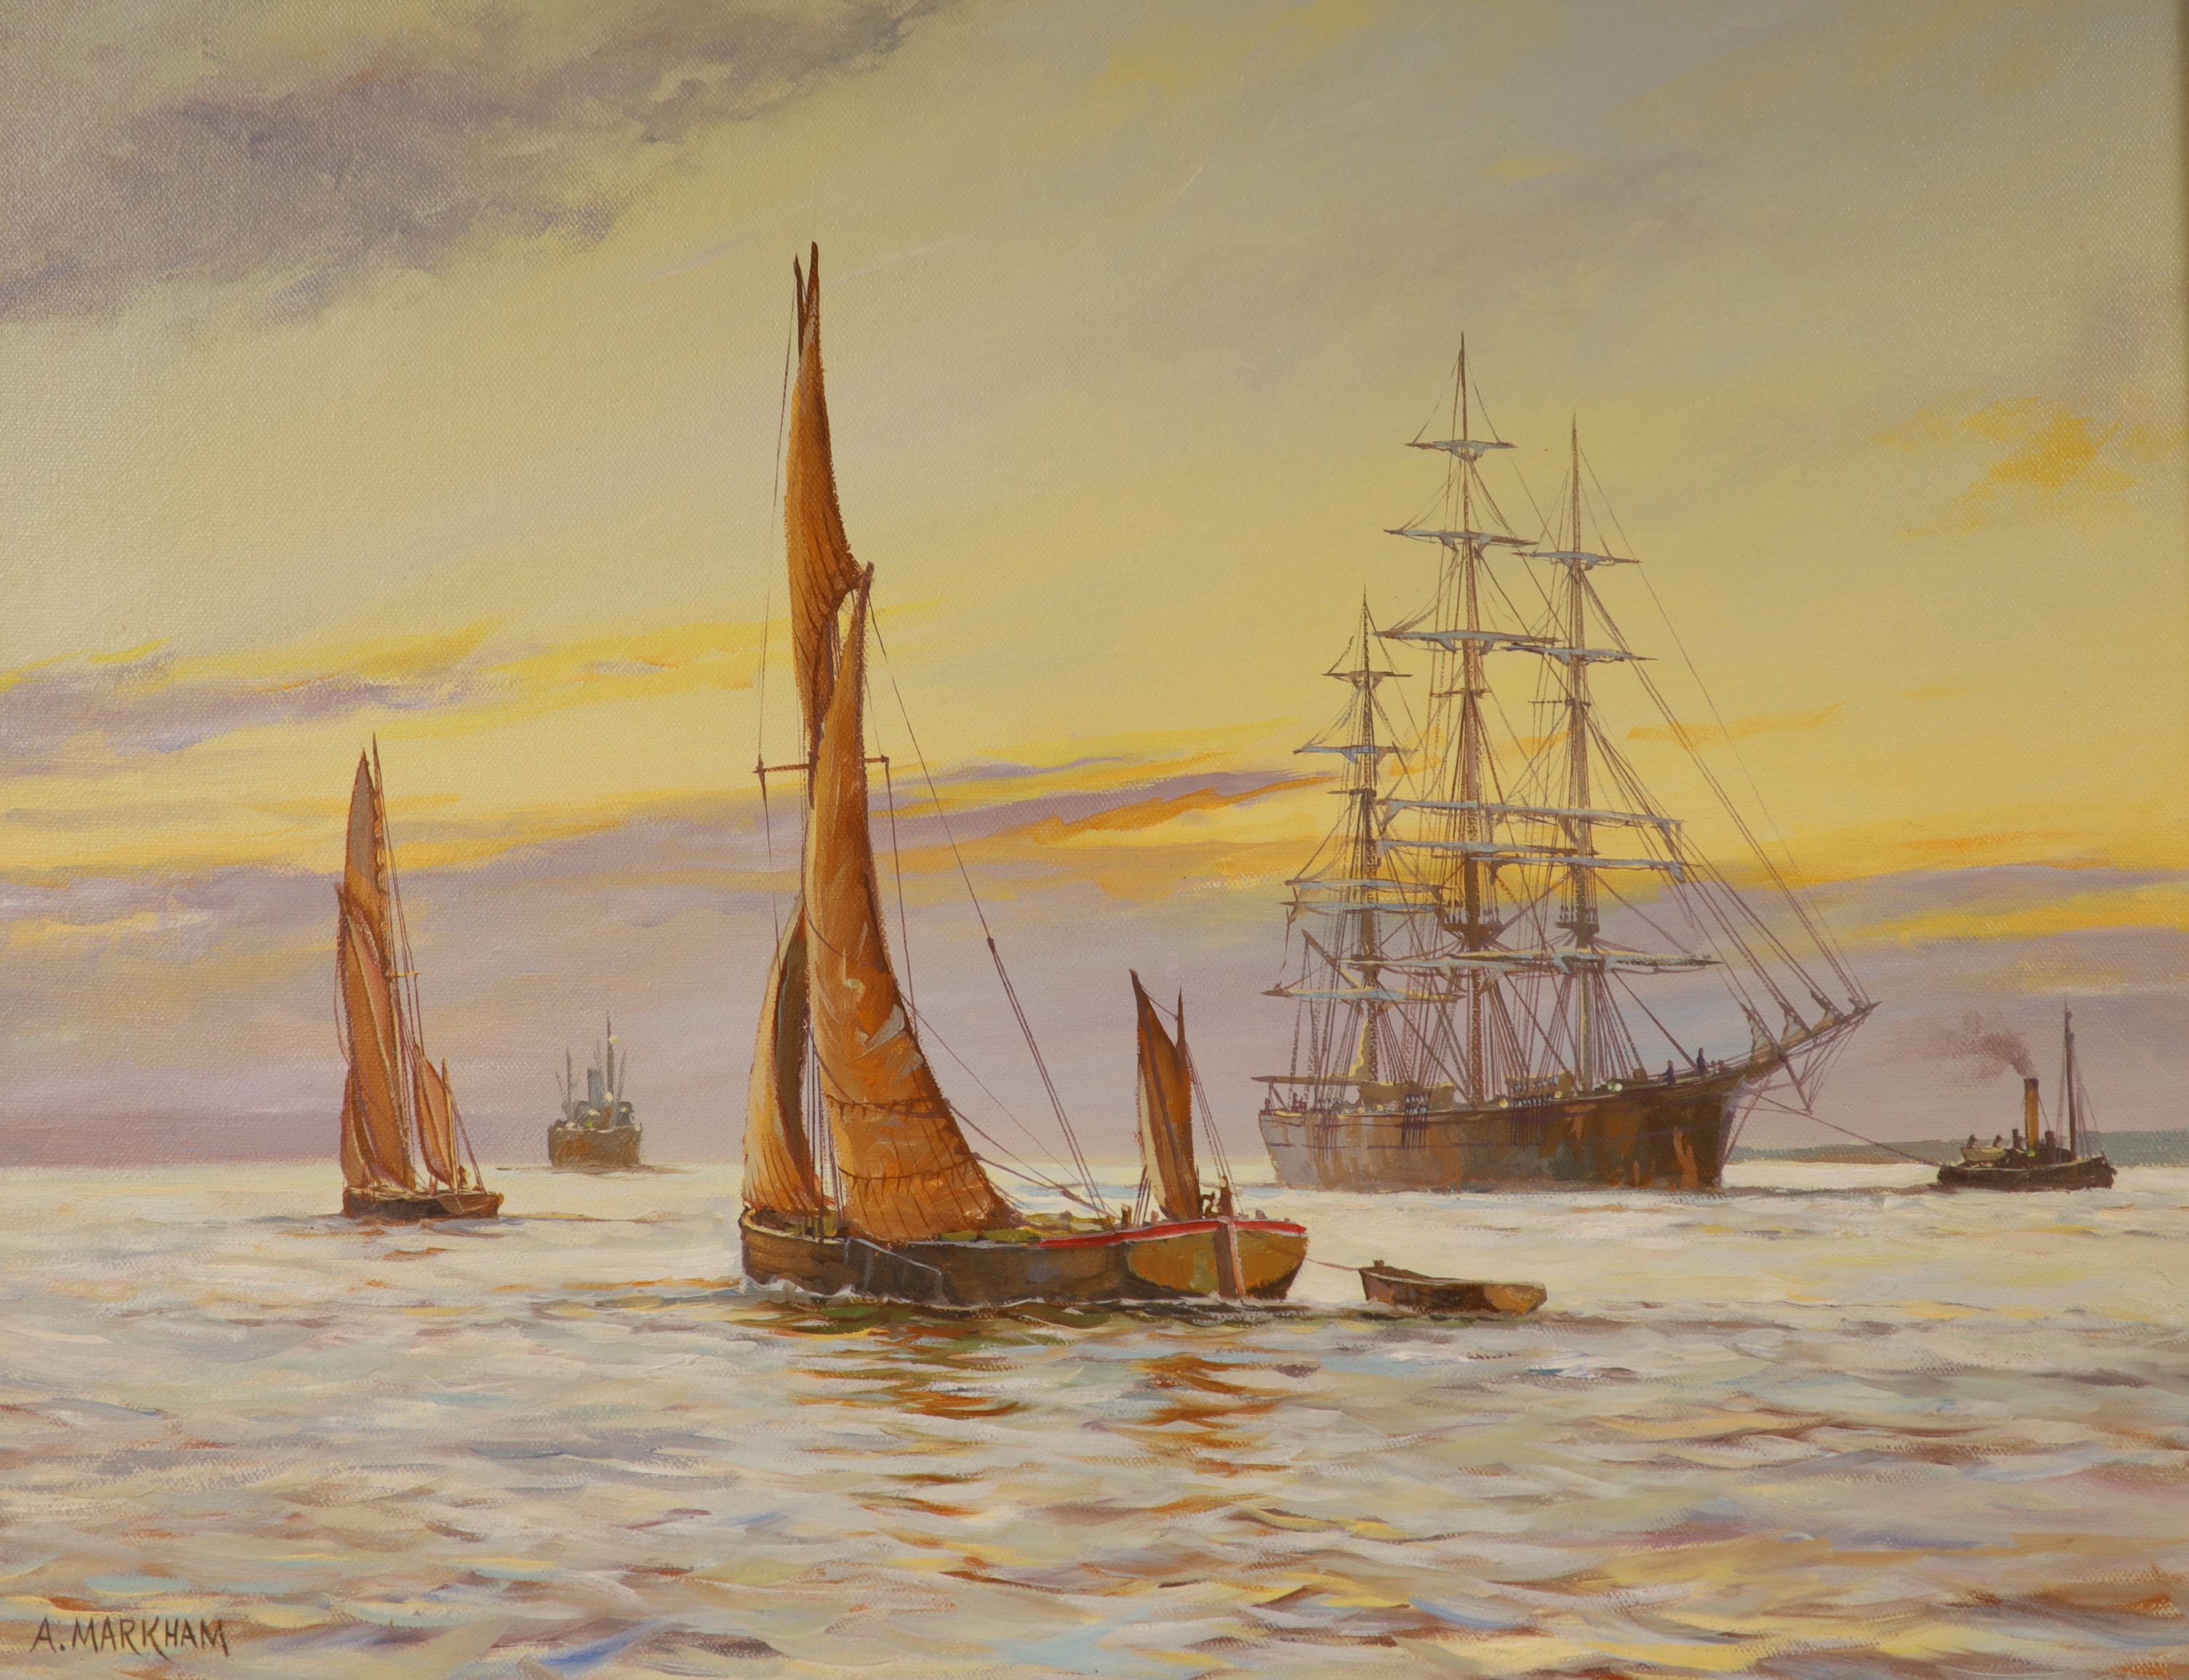 A* Markham (20th century), oil on canvas, Sailing barges and other vessels, signed, 40 x 50cm